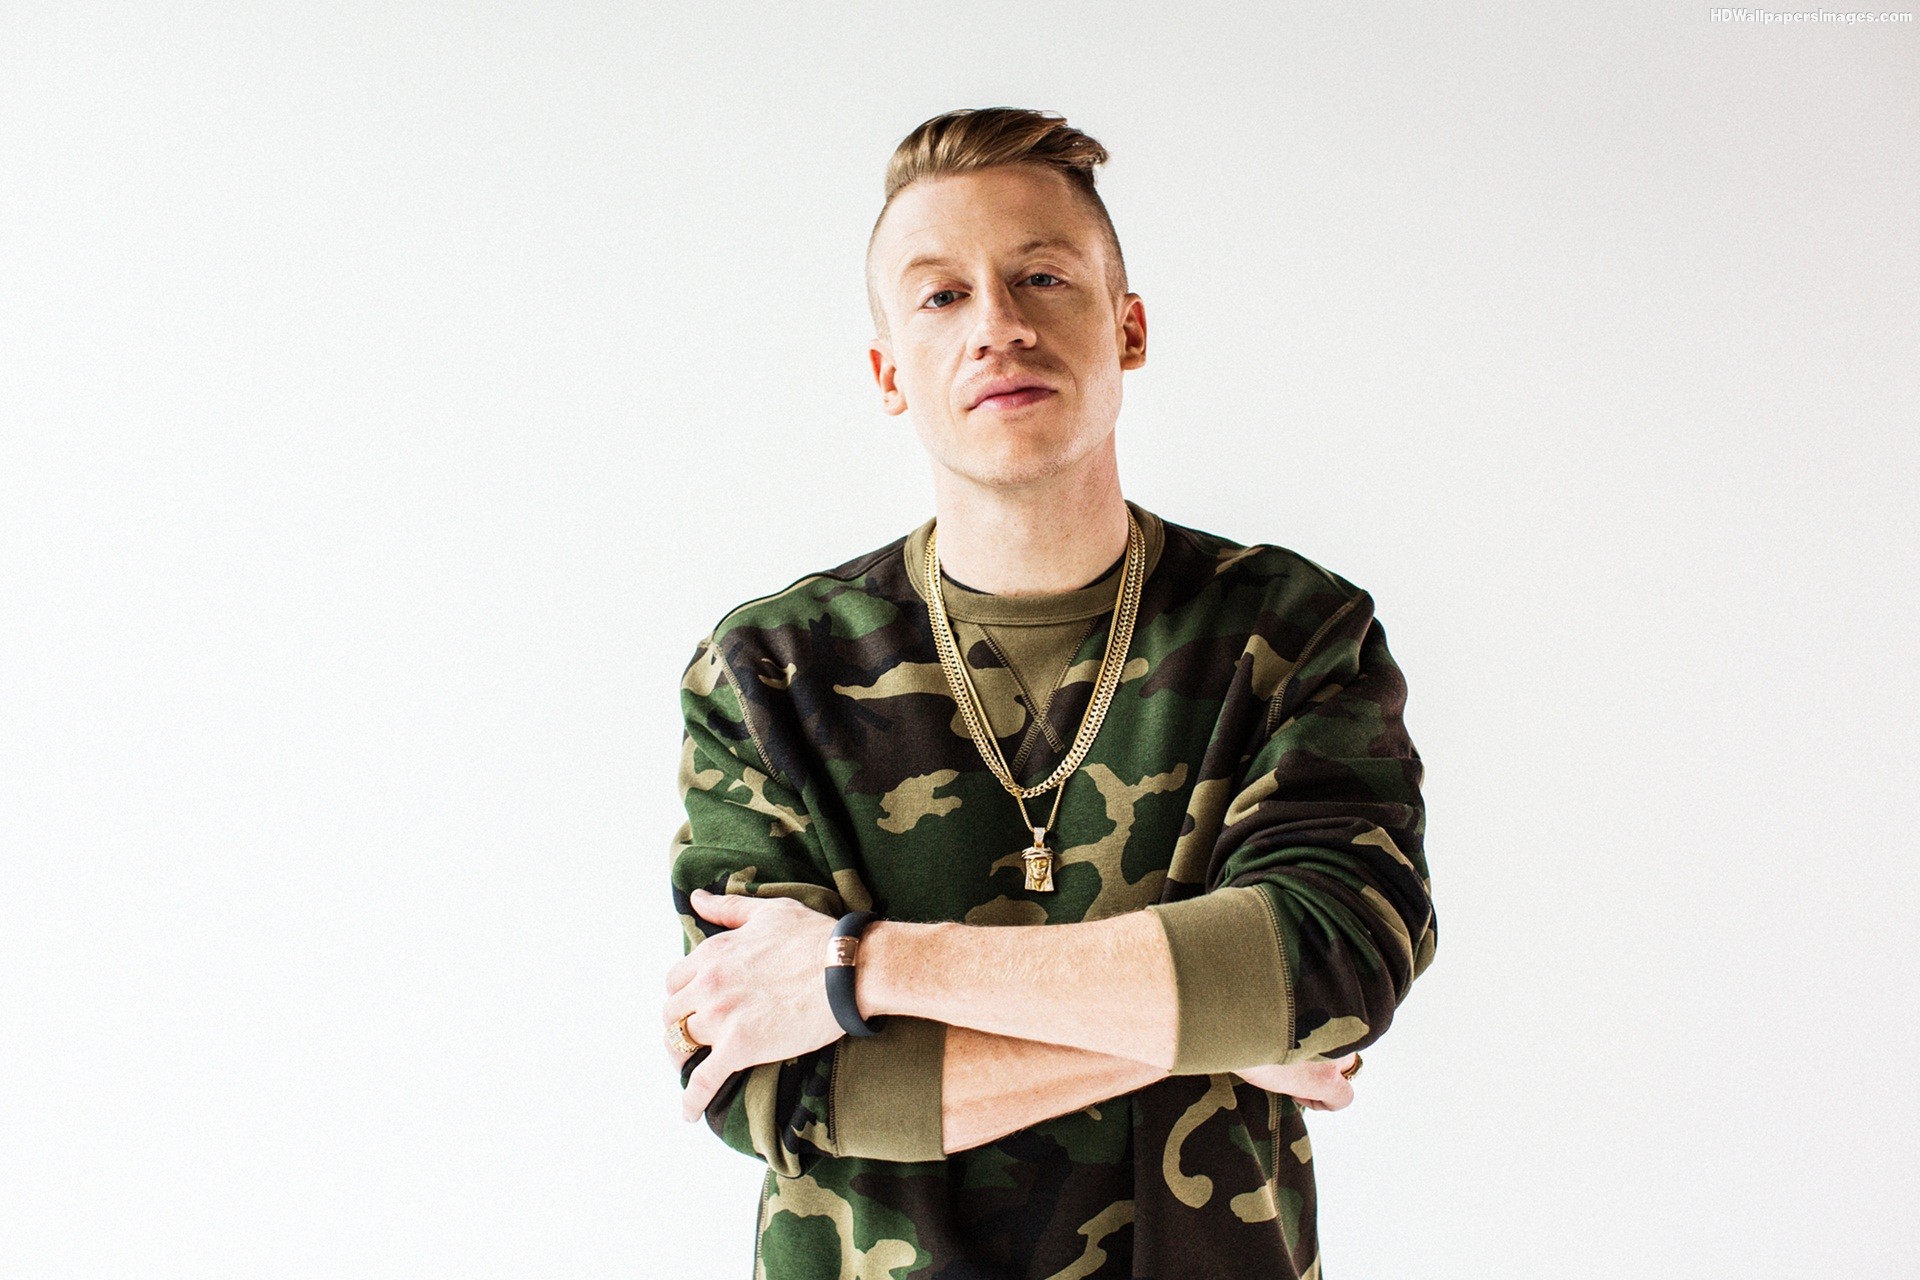 macklemore wallpaper background download mobile iphone s galaxy